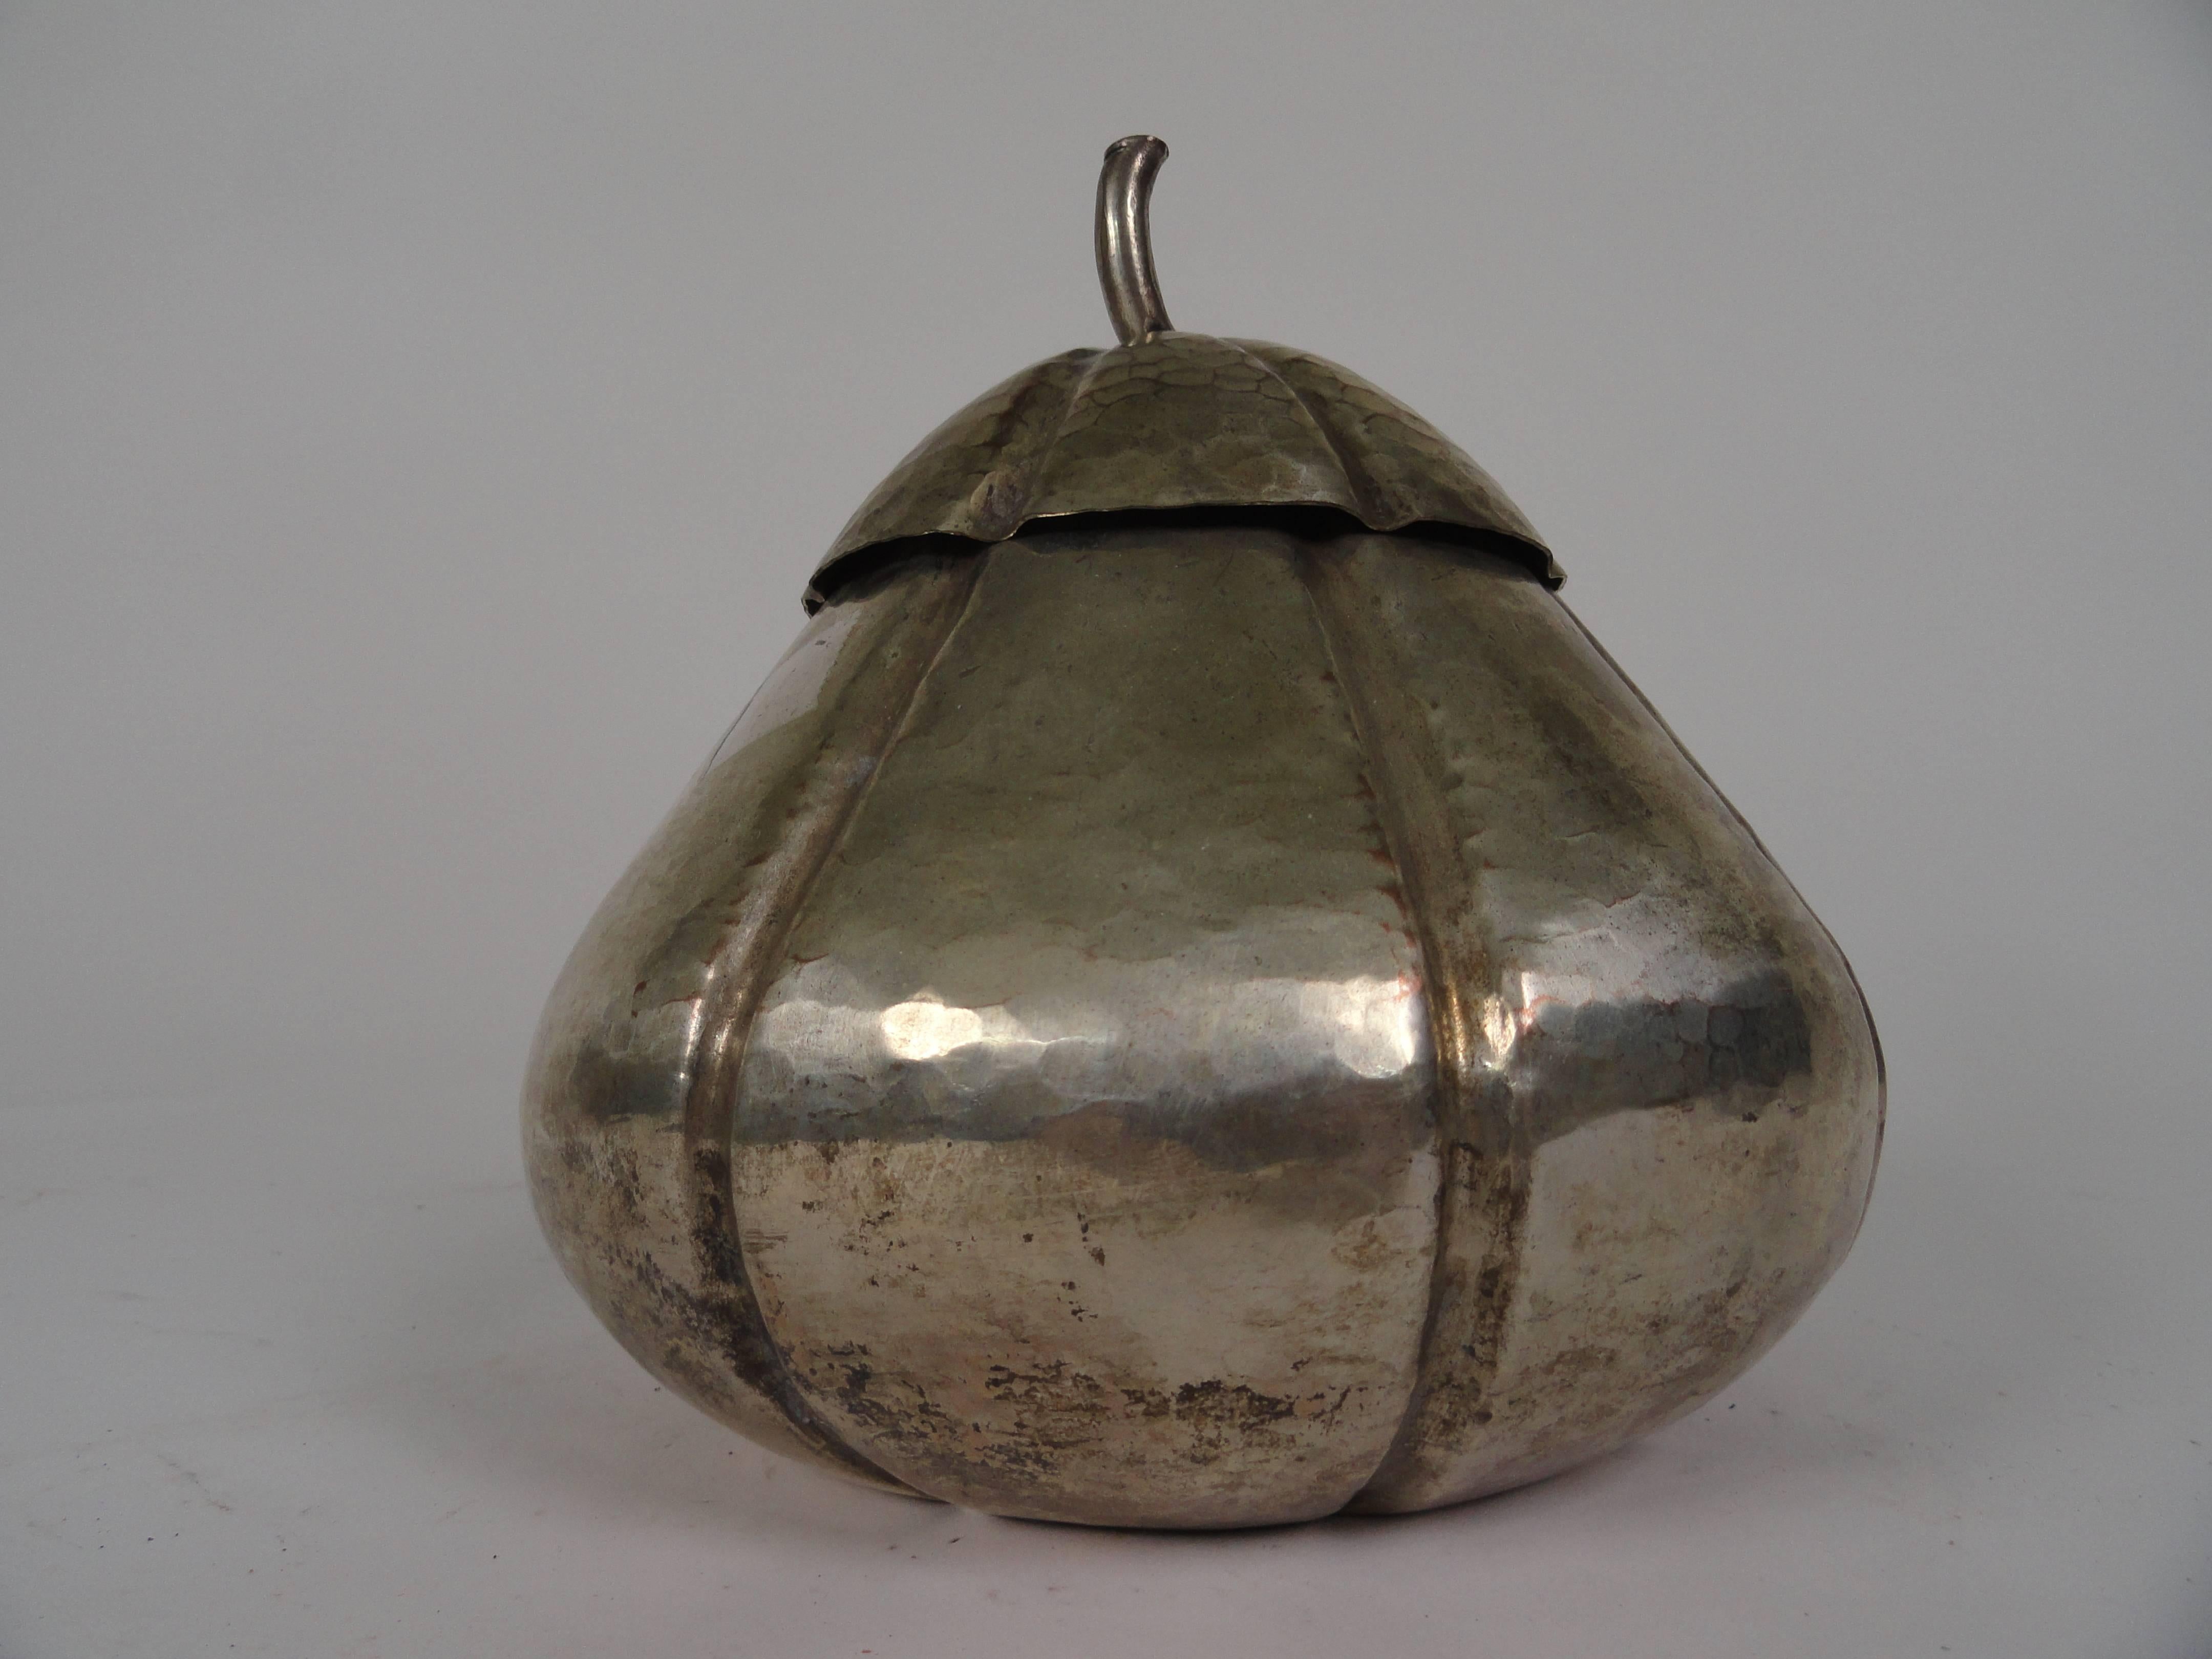 Silver plated on copper Italian gourd box, hammered copper with silver plating.  Whimsical style and naturalistic influence.  Removable top has a stem.